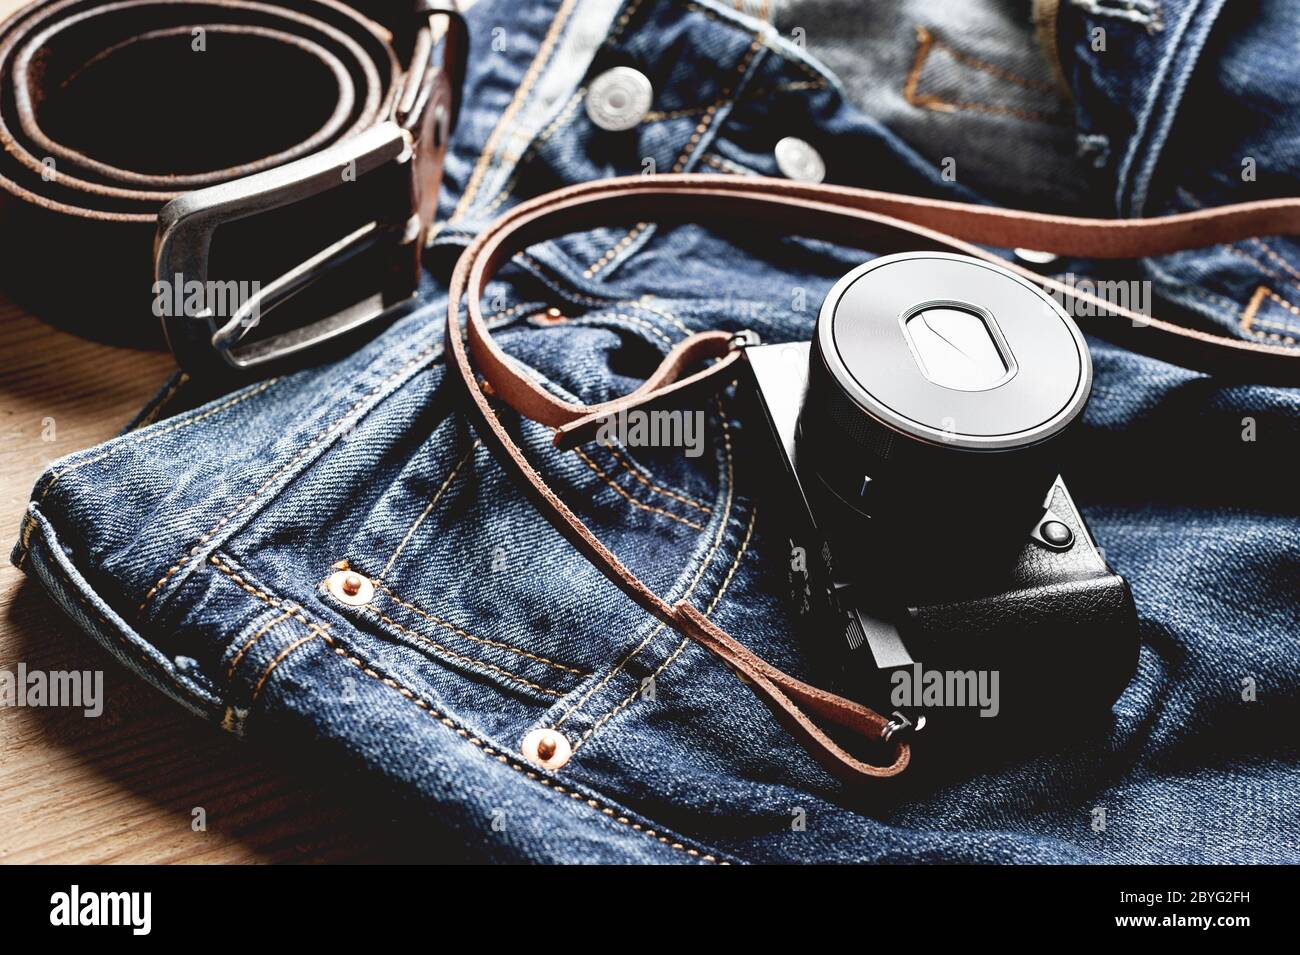 https://c8.alamy.com/comp/2BYG2FH/vintage-style-of-digital-mirrorless-camera-with-leather-strap-with-mens-accessories-and-gadgets-2BYG2FH.jpg